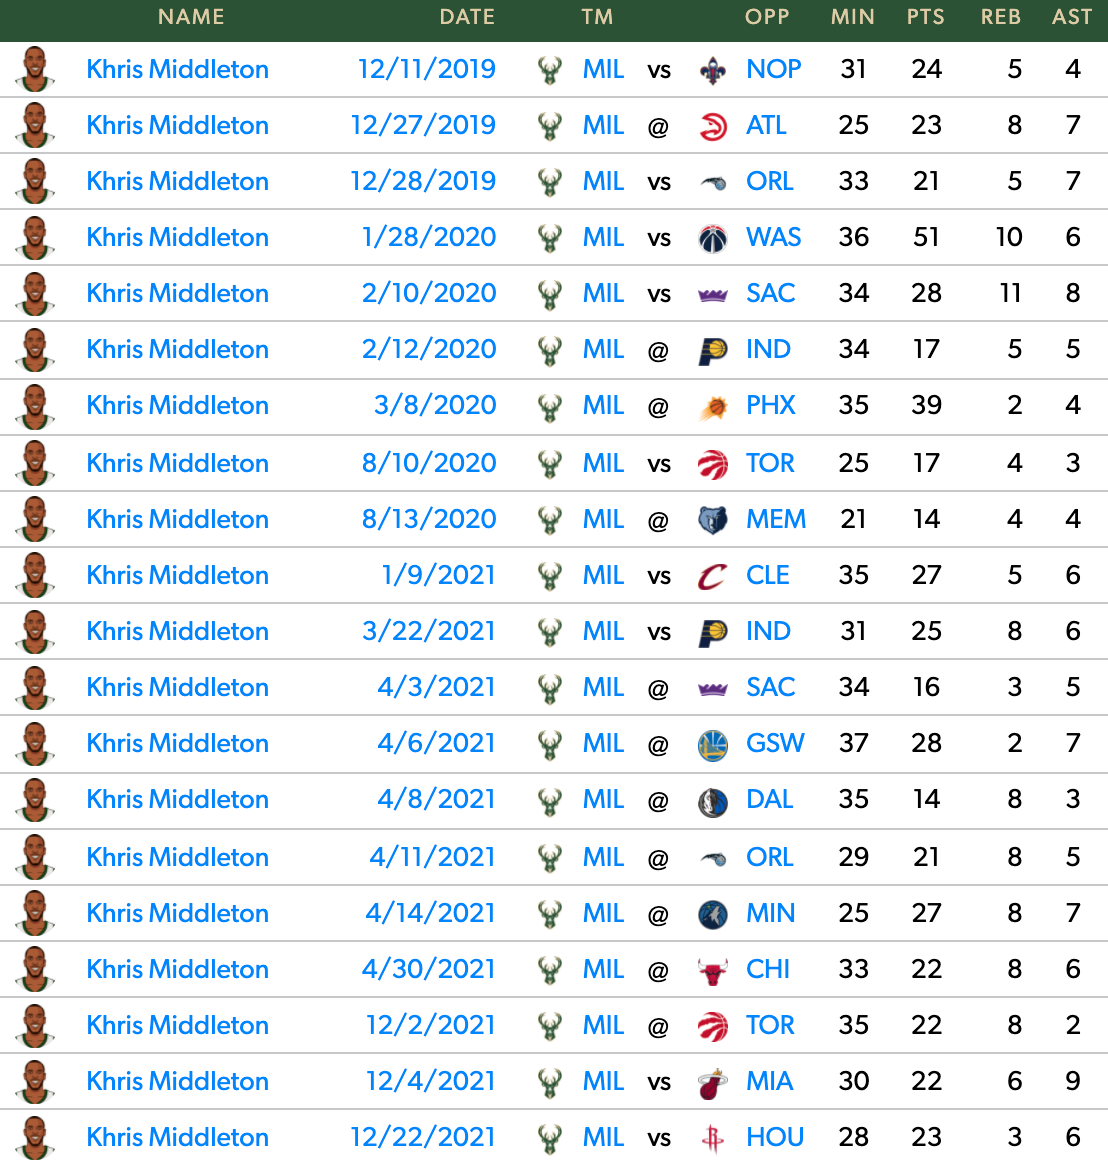 Middleton's game log without Giannis since 2019-20.